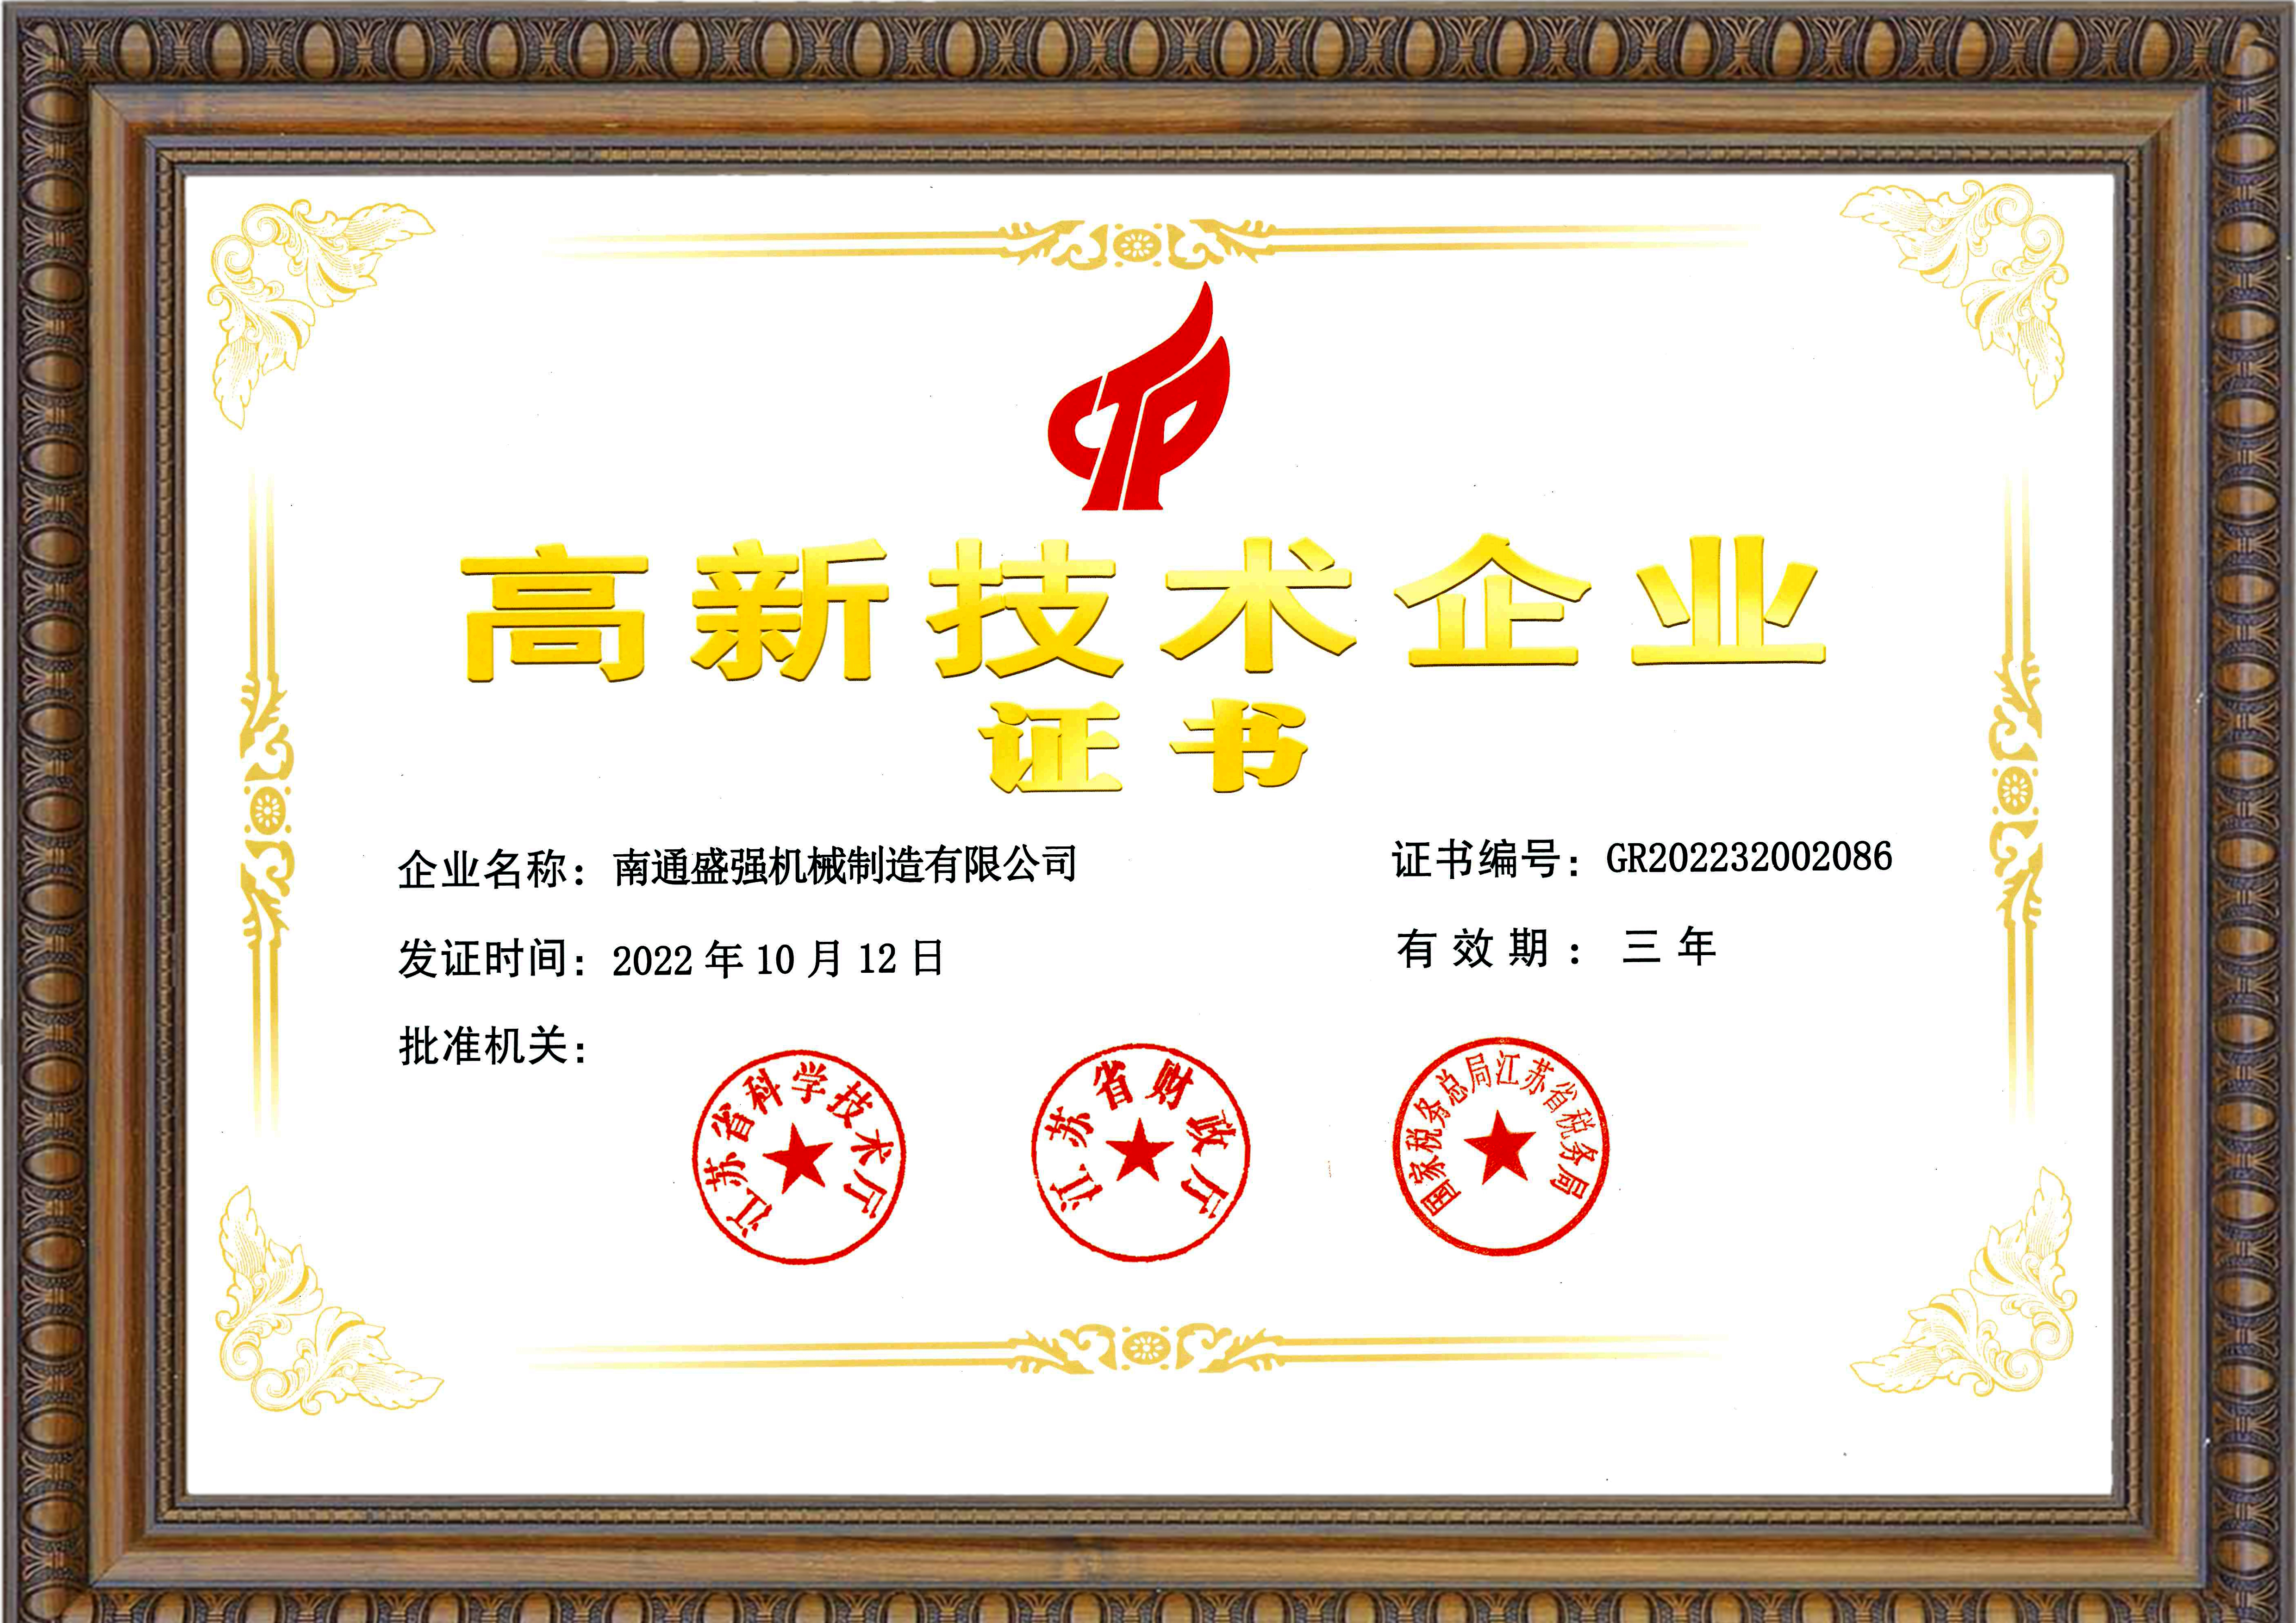 Congratulations to our company for obtaining the national "High-tech Enterprise Certificate"